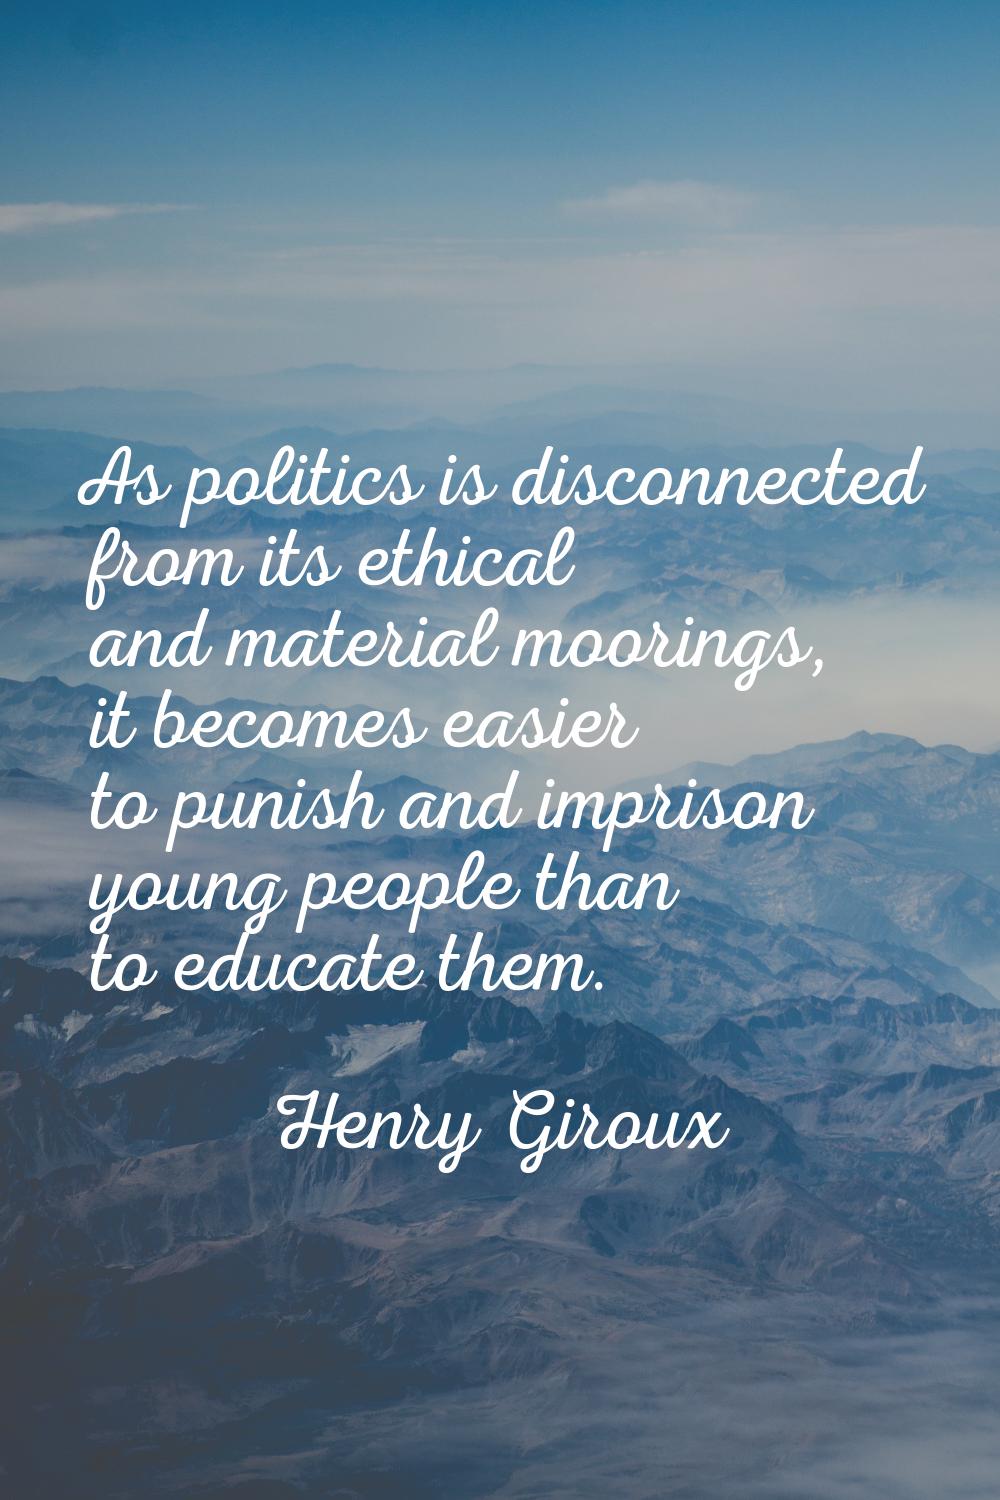 As politics is disconnected from its ethical and material moorings, it becomes easier to punish and